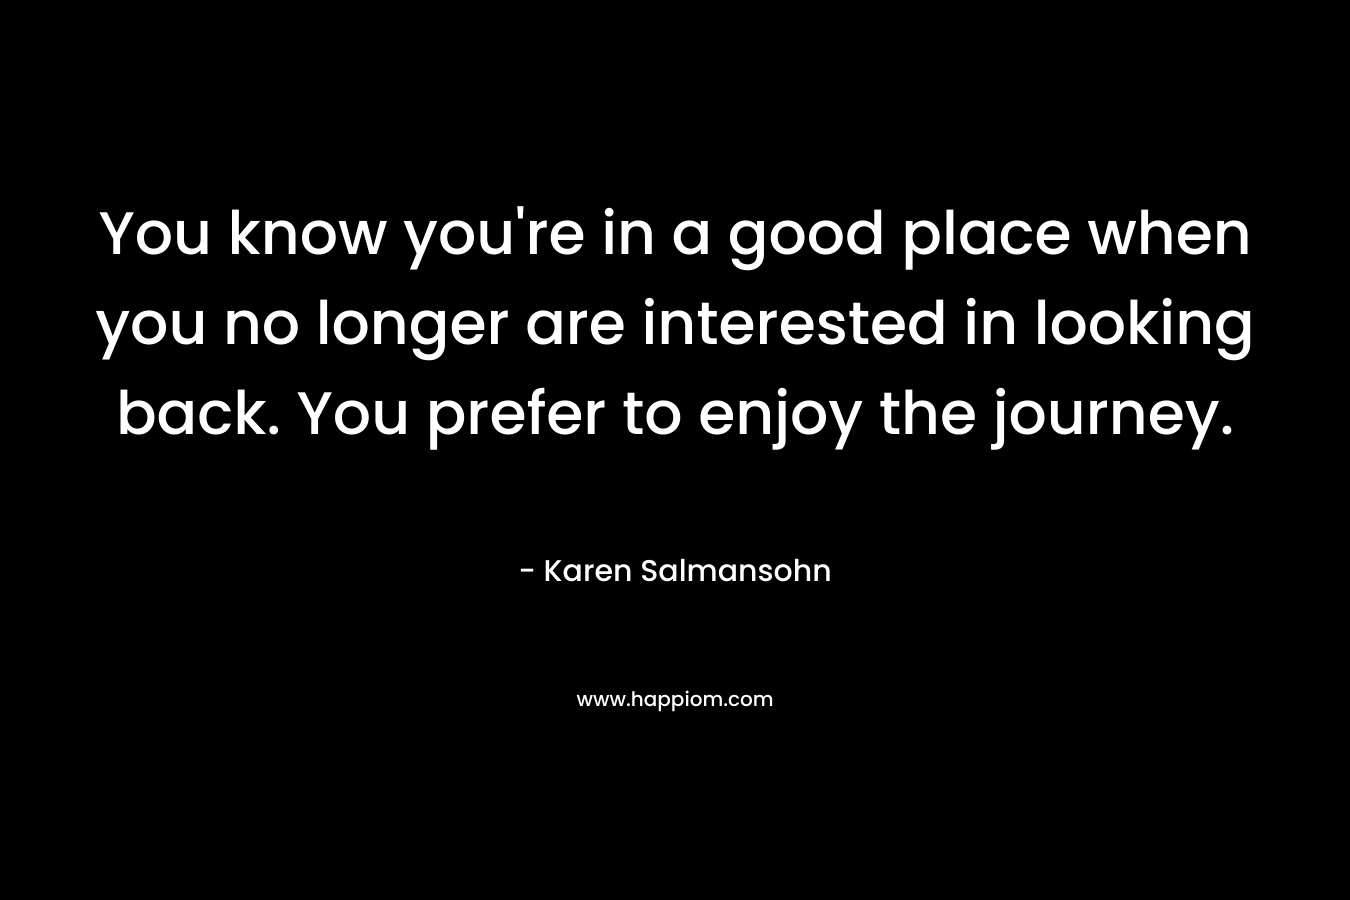 You know you’re in a good place when you no longer are interested in looking back. You prefer to enjoy the journey. – Karen Salmansohn